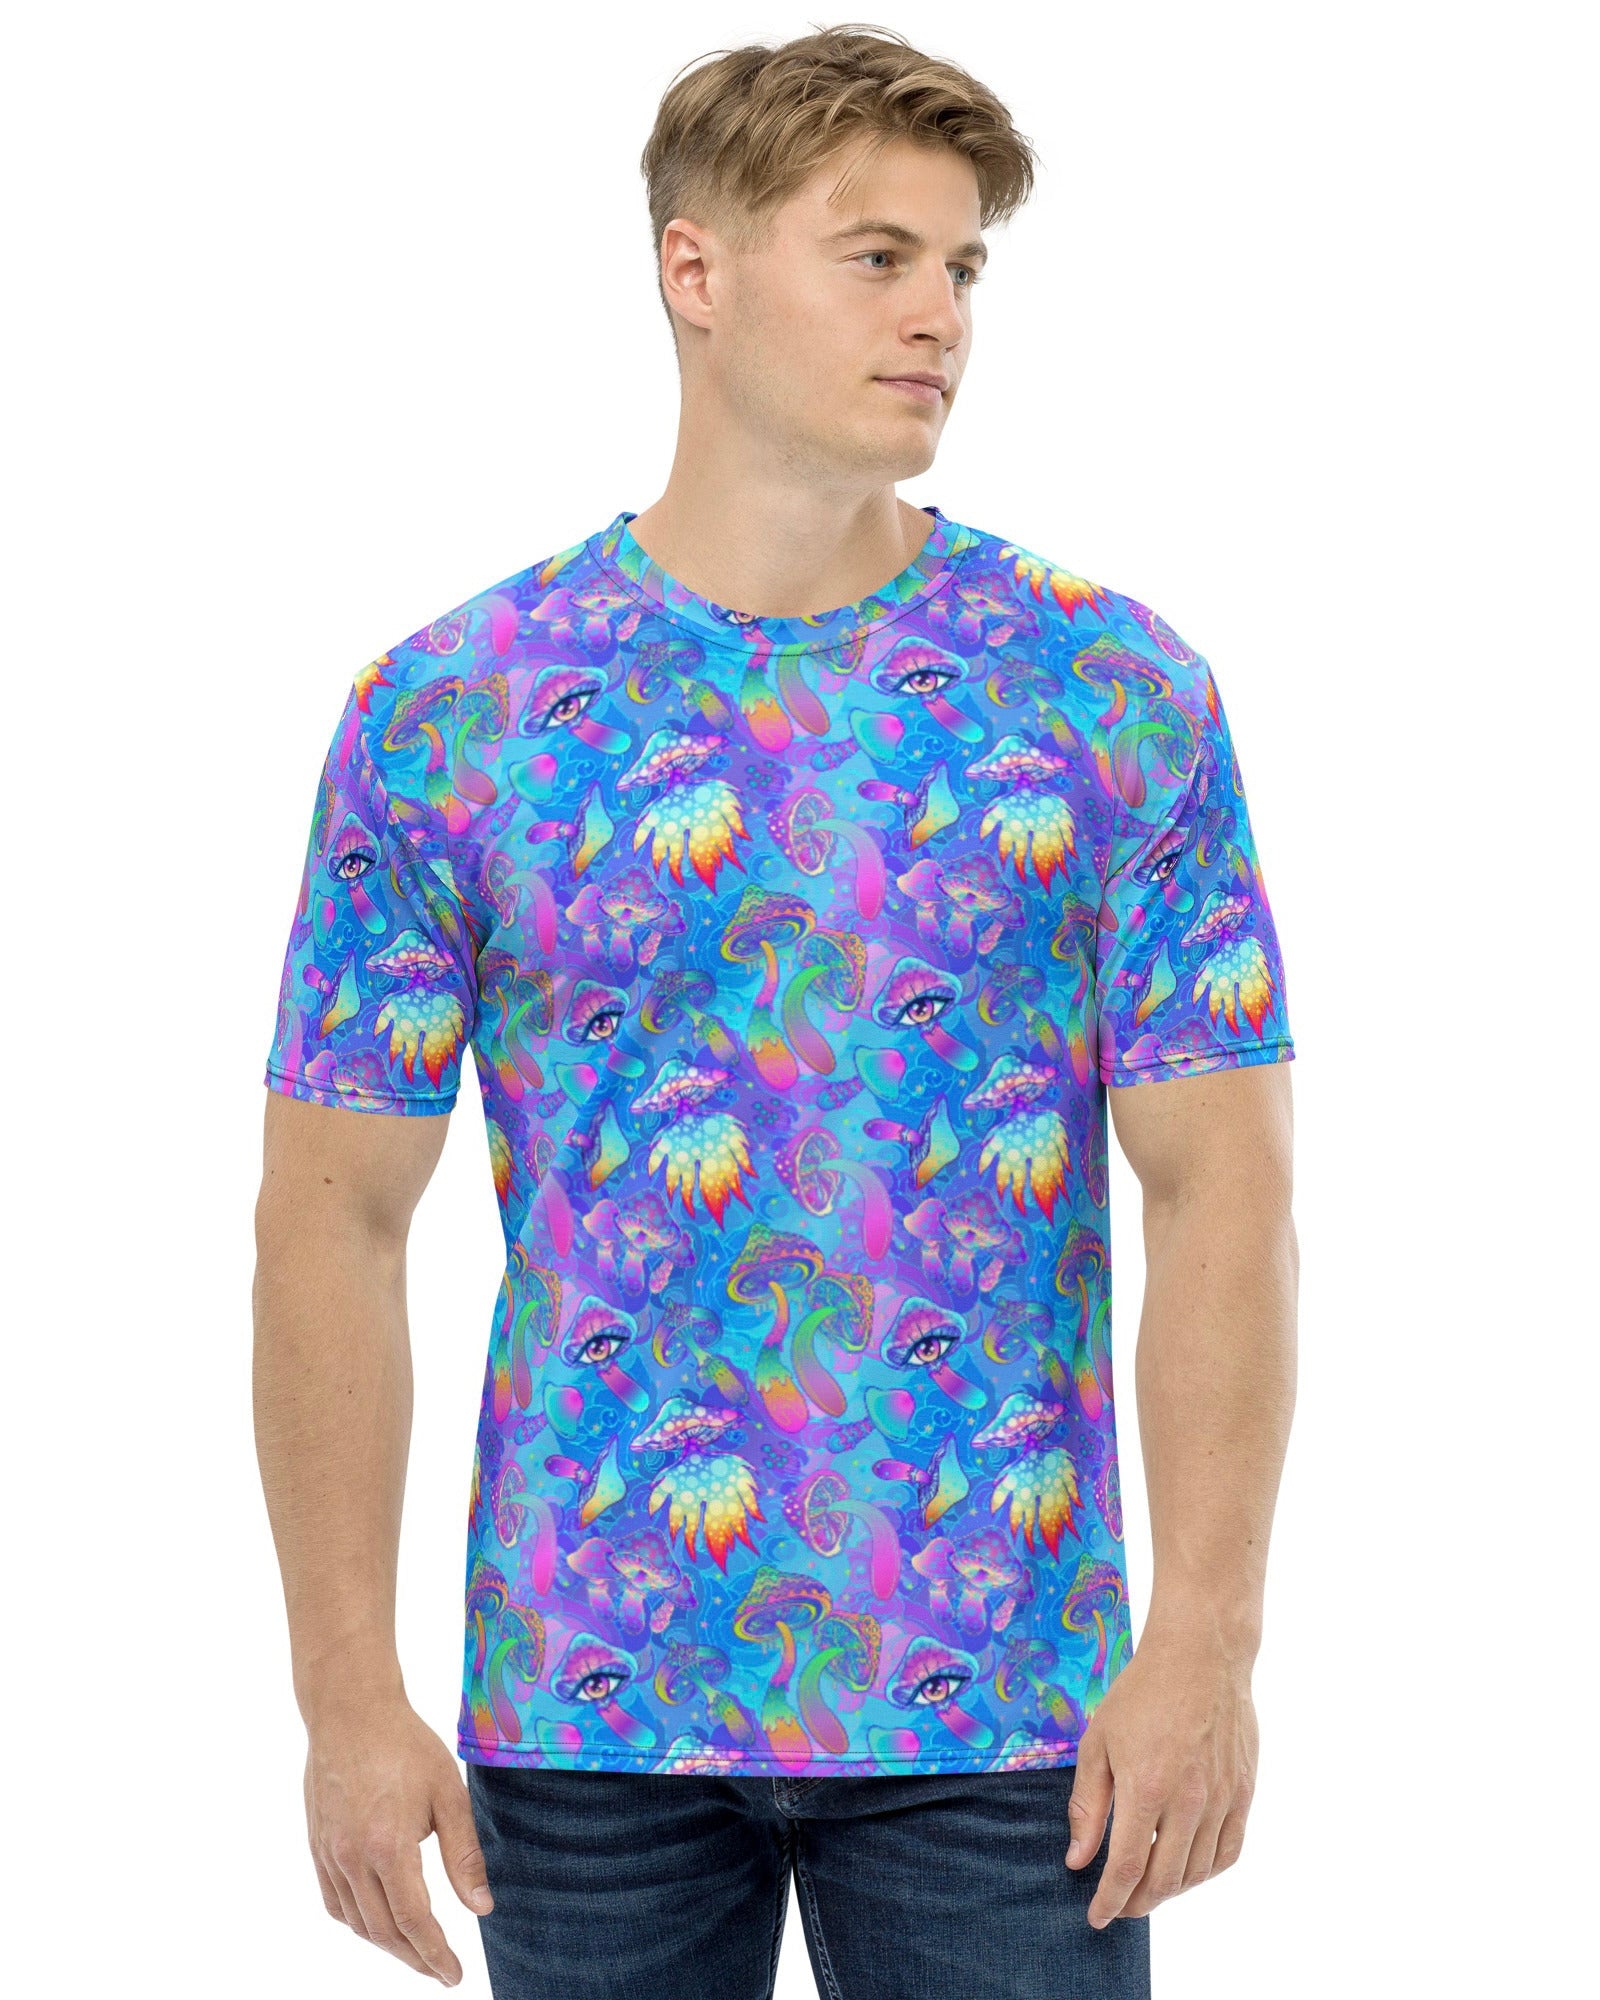 Shroomin Blue T-Shirt, , - One Stop Rave